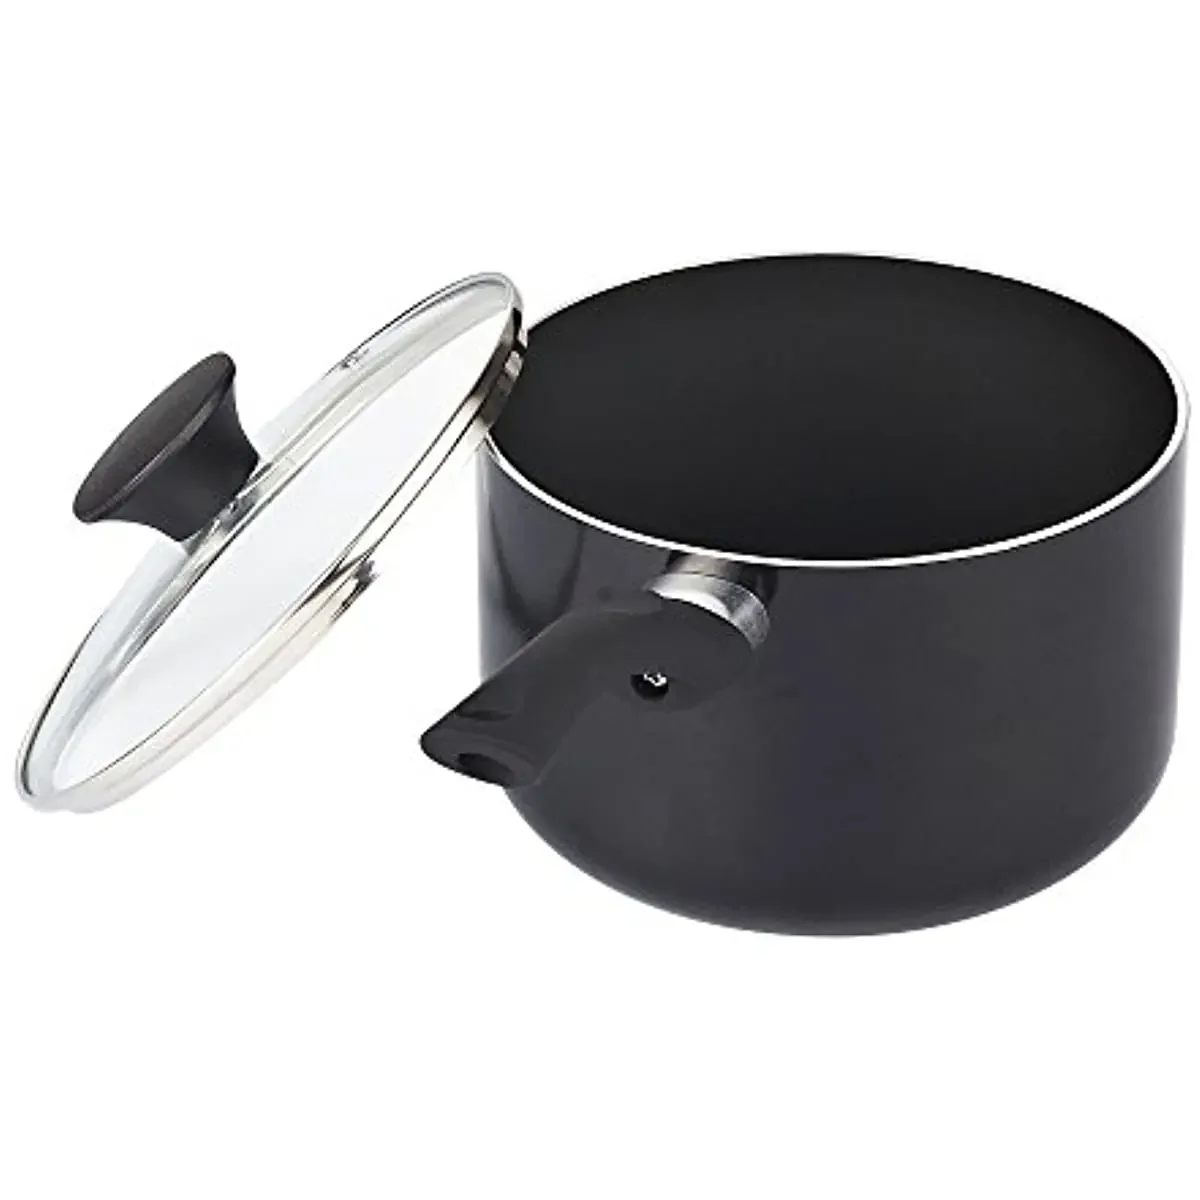 Cook N Home Non-Stick Basic Kitchen Cookware Pots and Pans Set